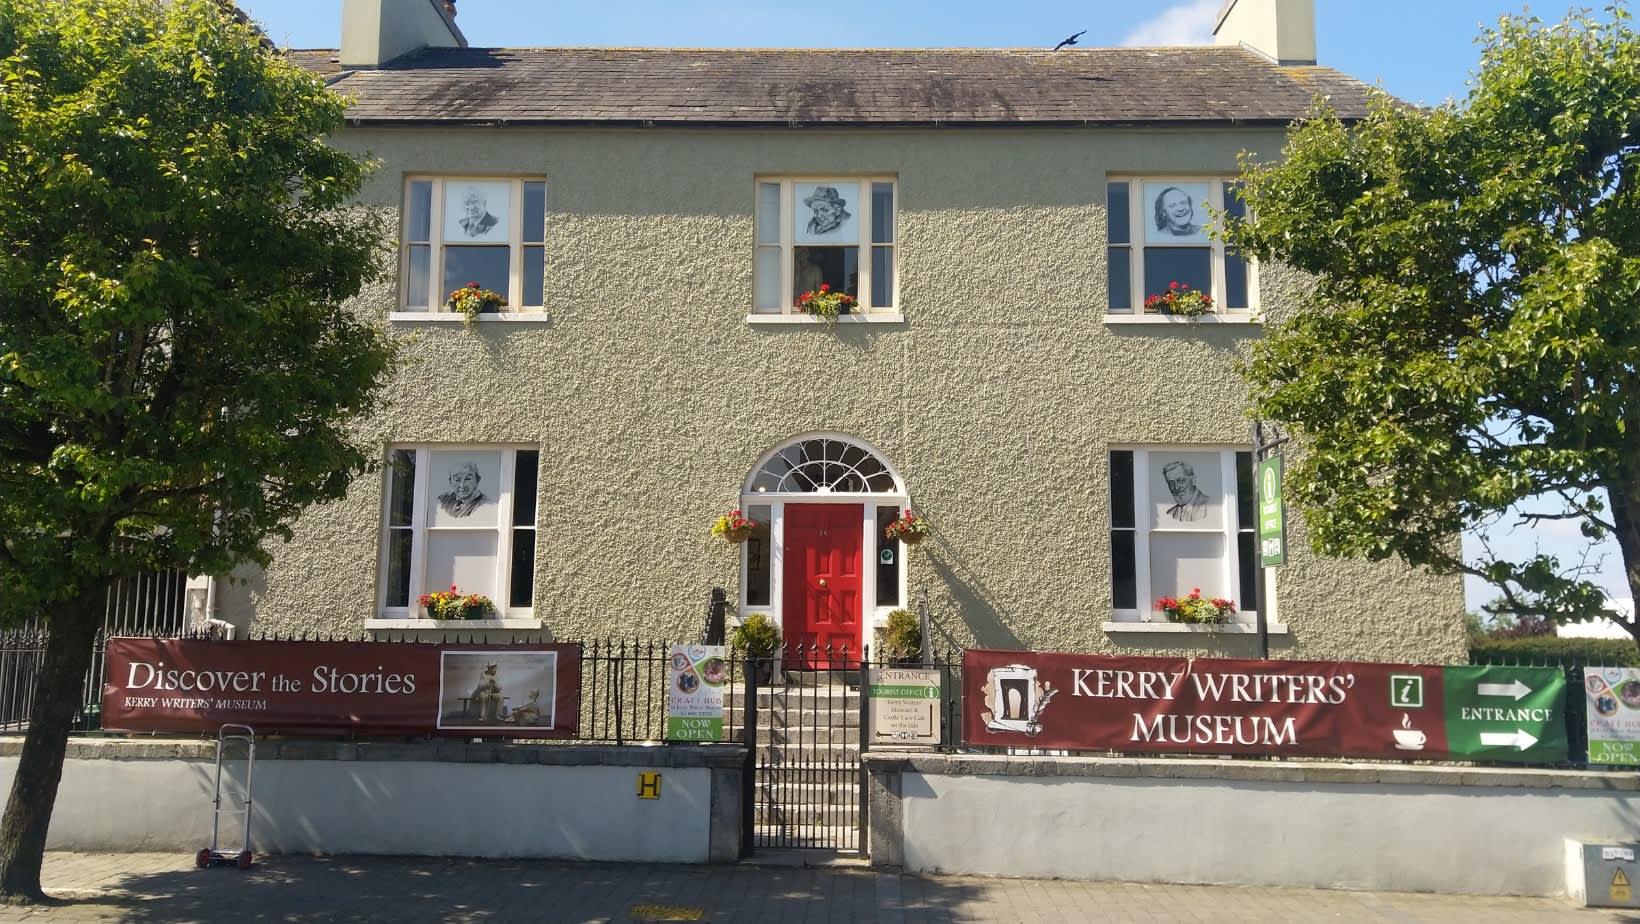 kerry North listowel Kerry writers museum FB Cover Image